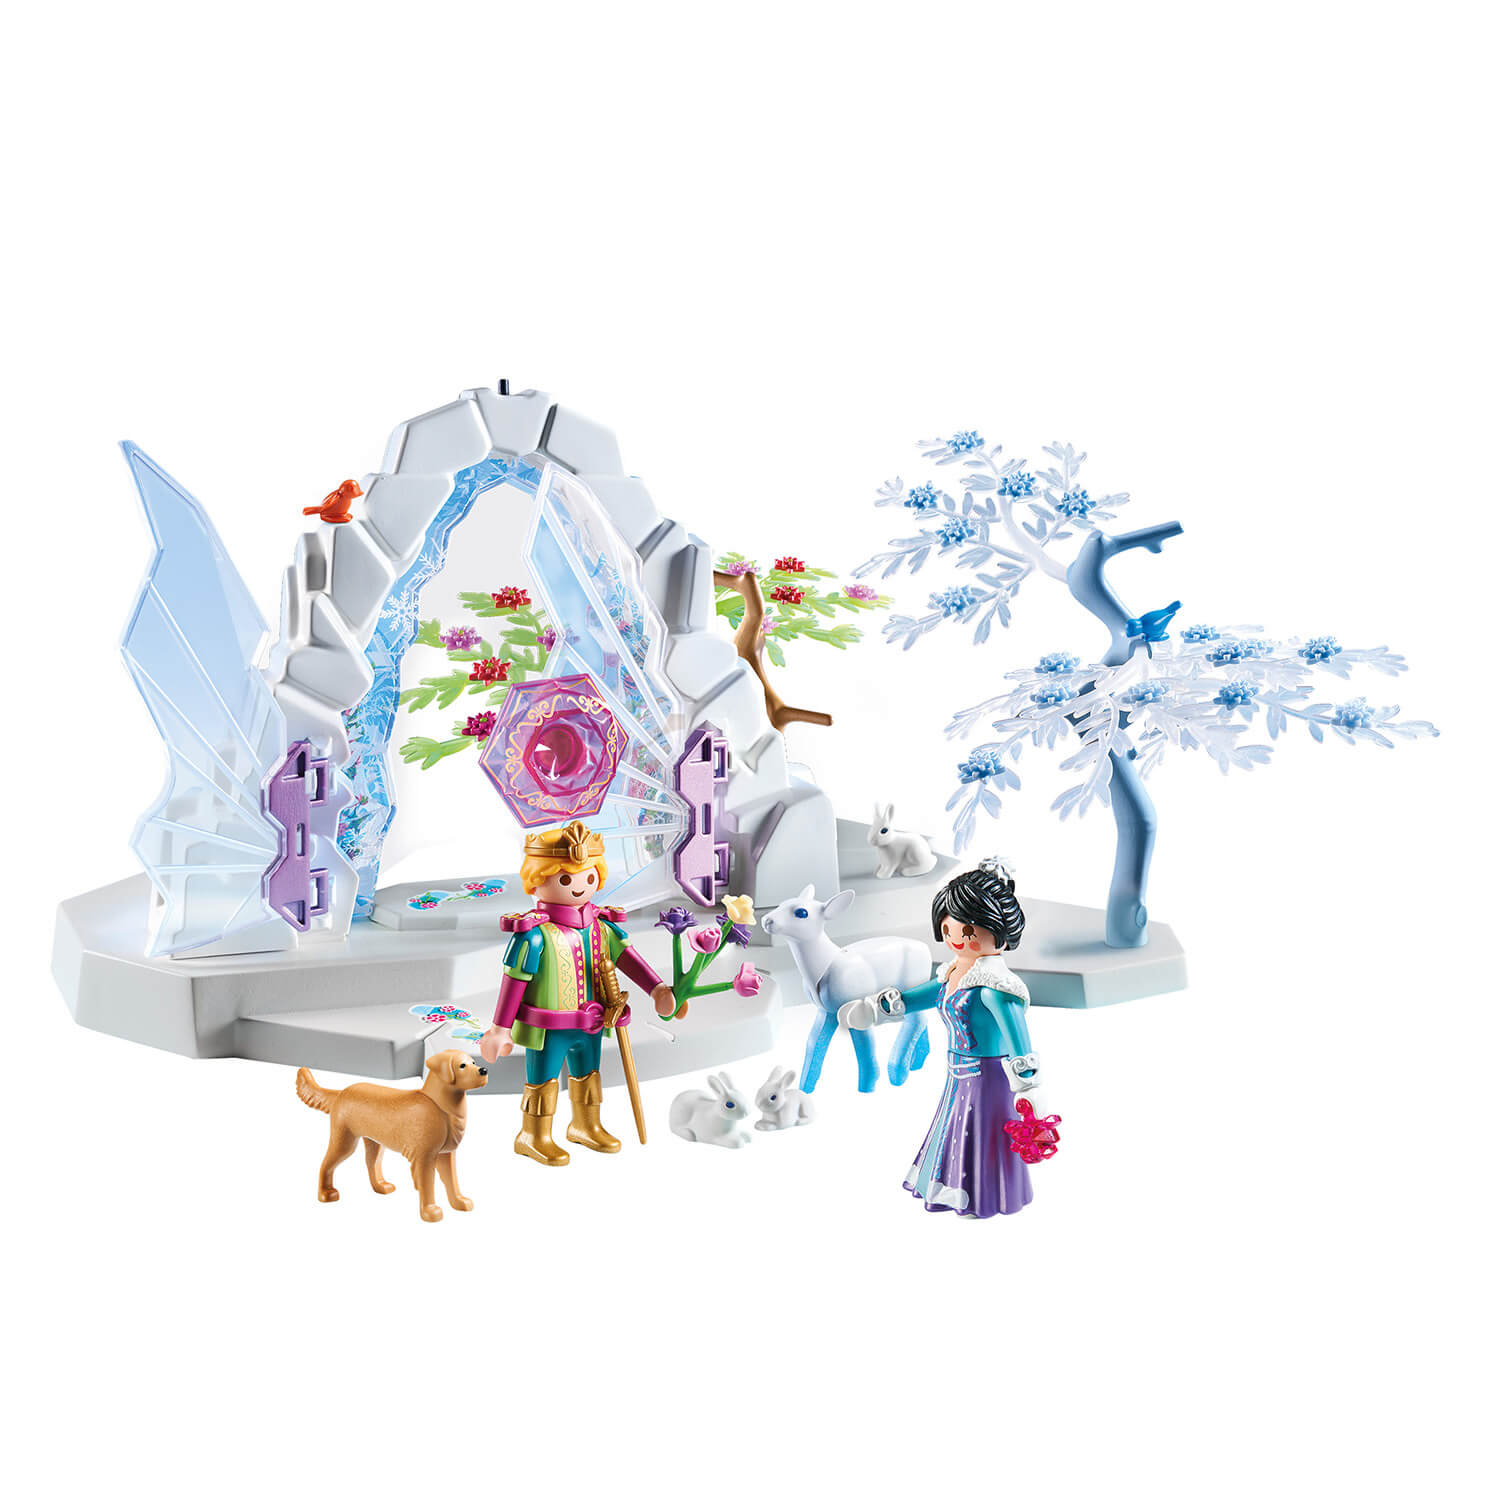 PLAYMOBIL Crystal Palace Crystal Gate to the Winter World (9471)